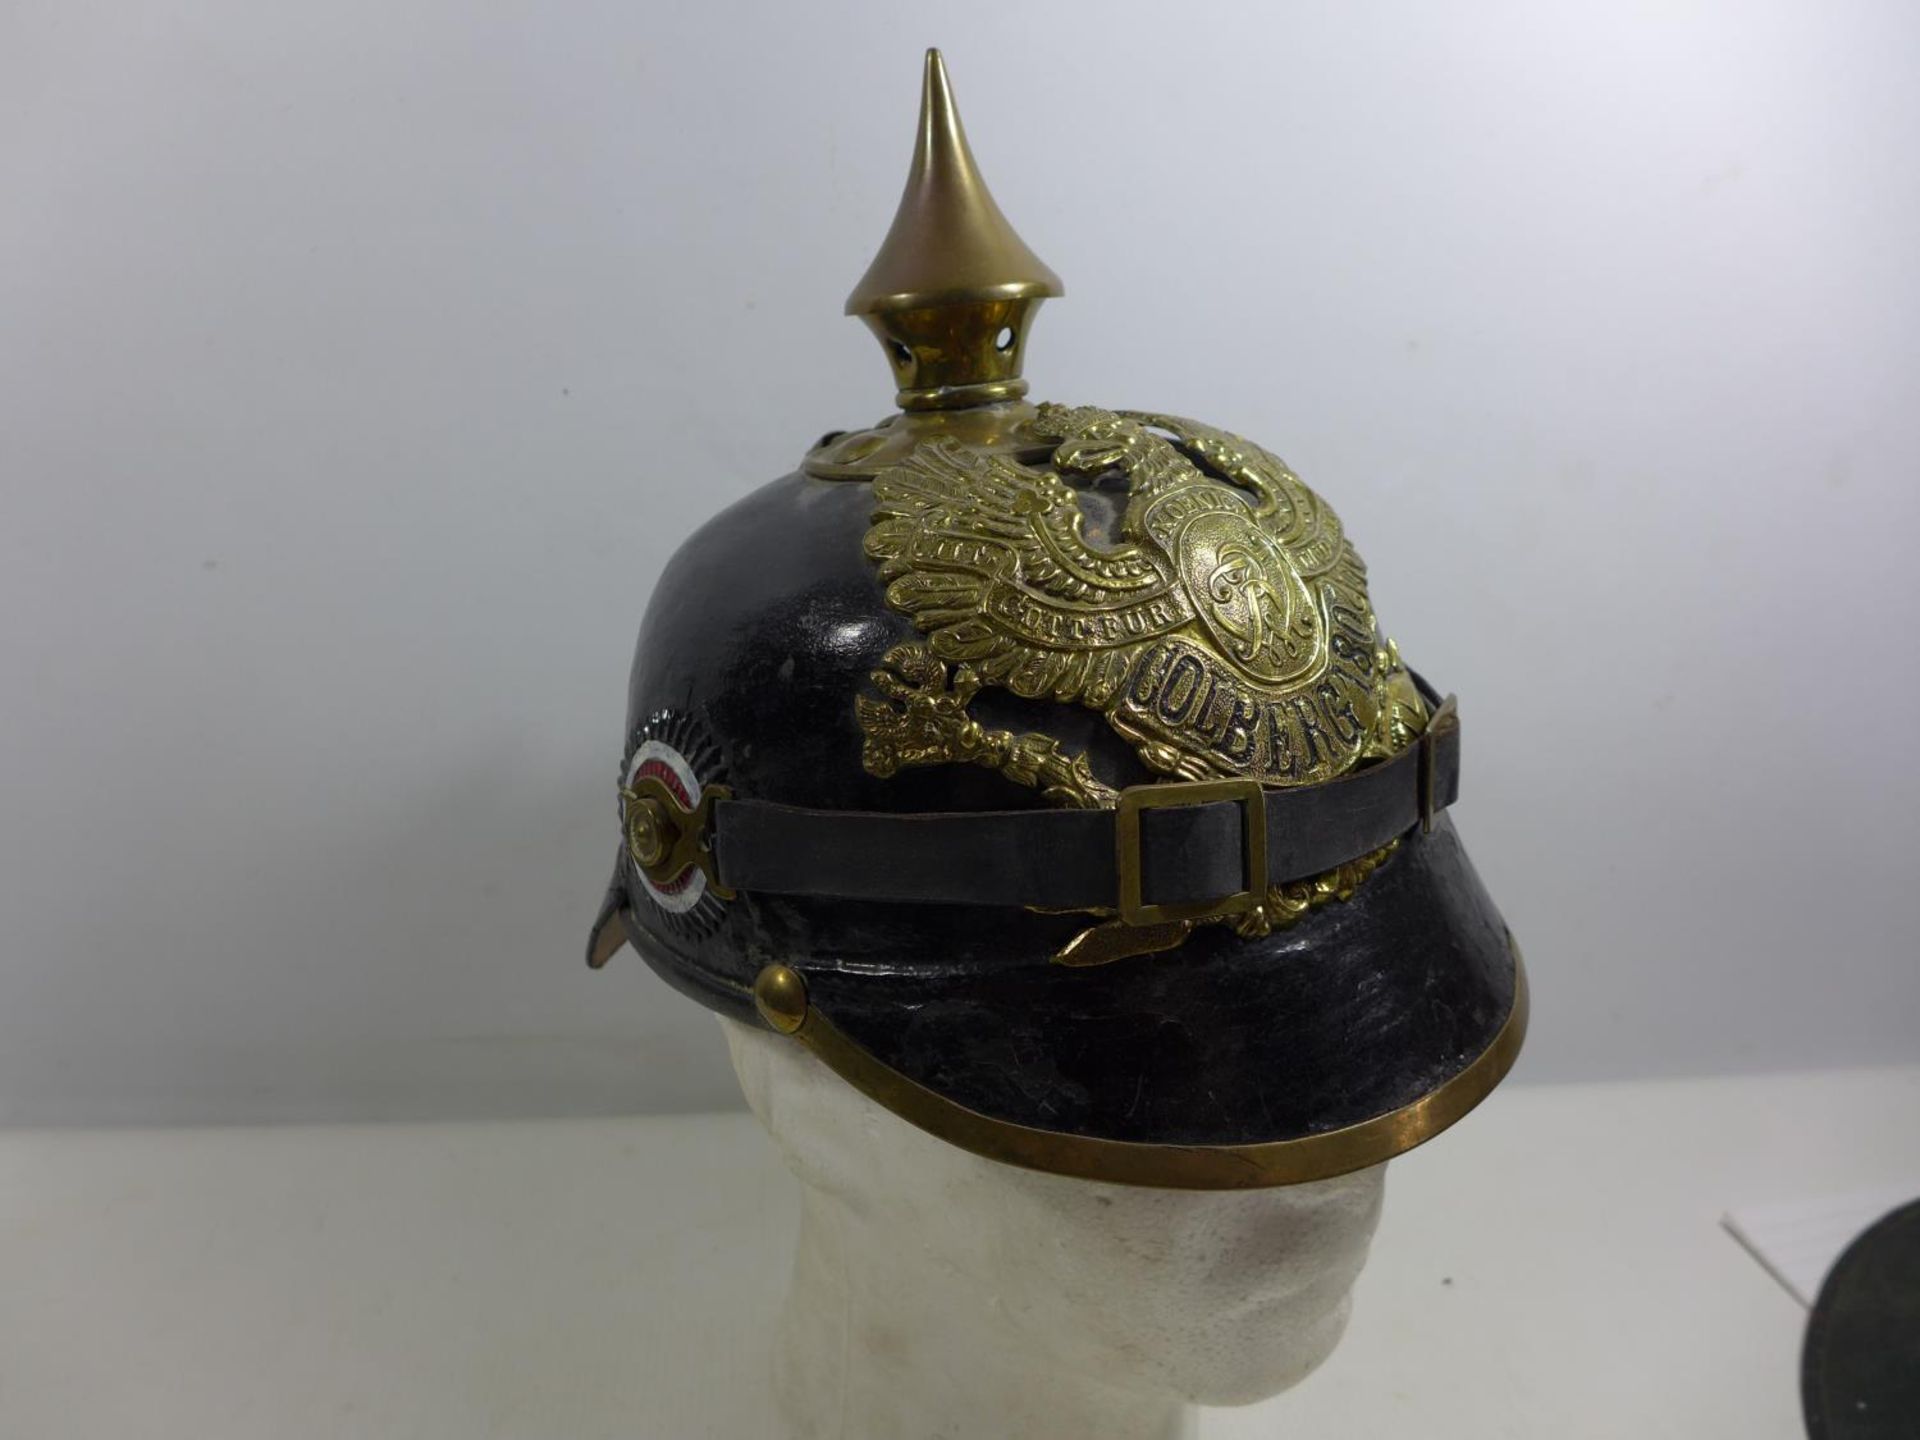 A REPLICA IMPERIAL GERMAN PICKELHAUBE LEATHER COVERED HELMET WITH LEATHER LINING - Image 2 of 4